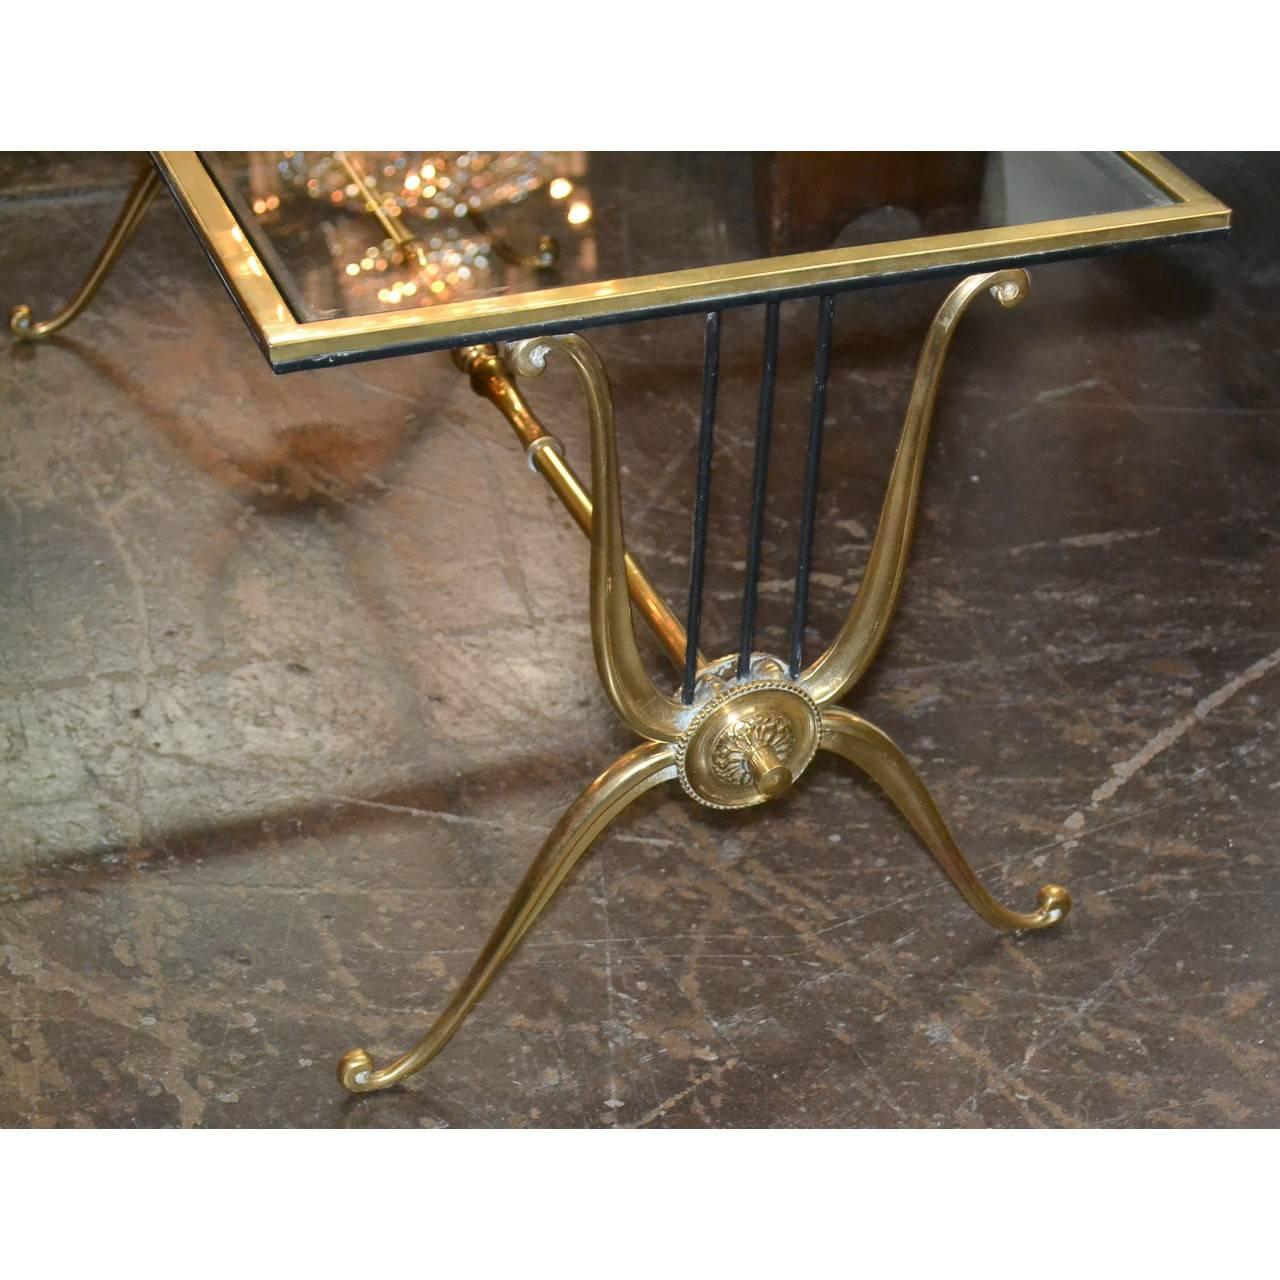 Wonderfully styled French Mid-Century Modern glass top rectangular coffee table. The uniquely designed base with polished brass and iron lyre-form ends with turned brass stretcher and nicely contoured legs,

circa 1950

Would mix superbly with a